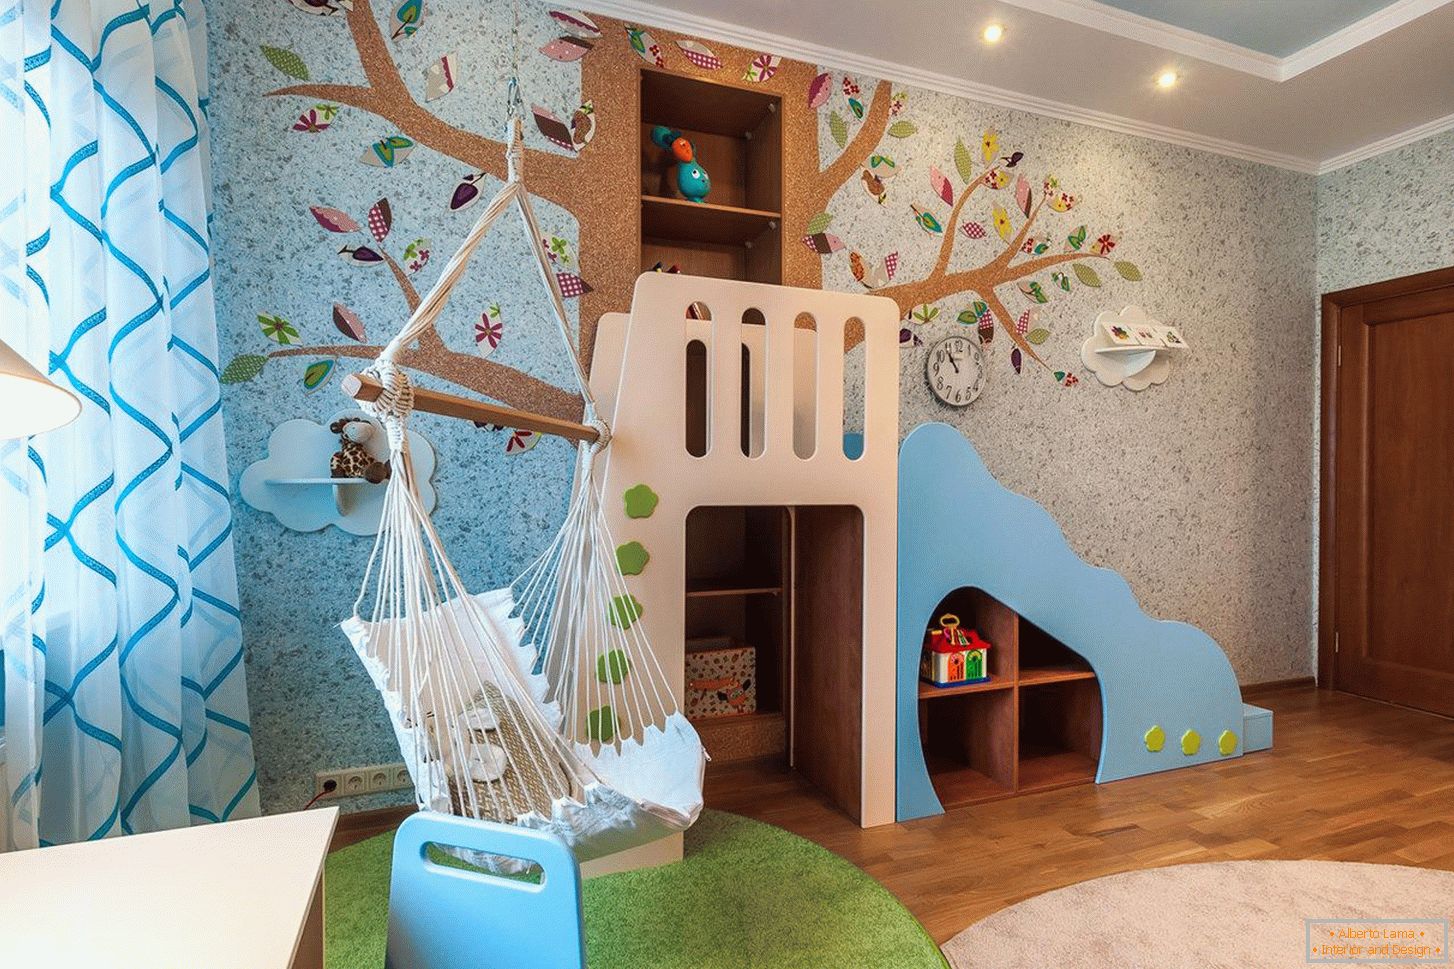 Wall design in the children's room